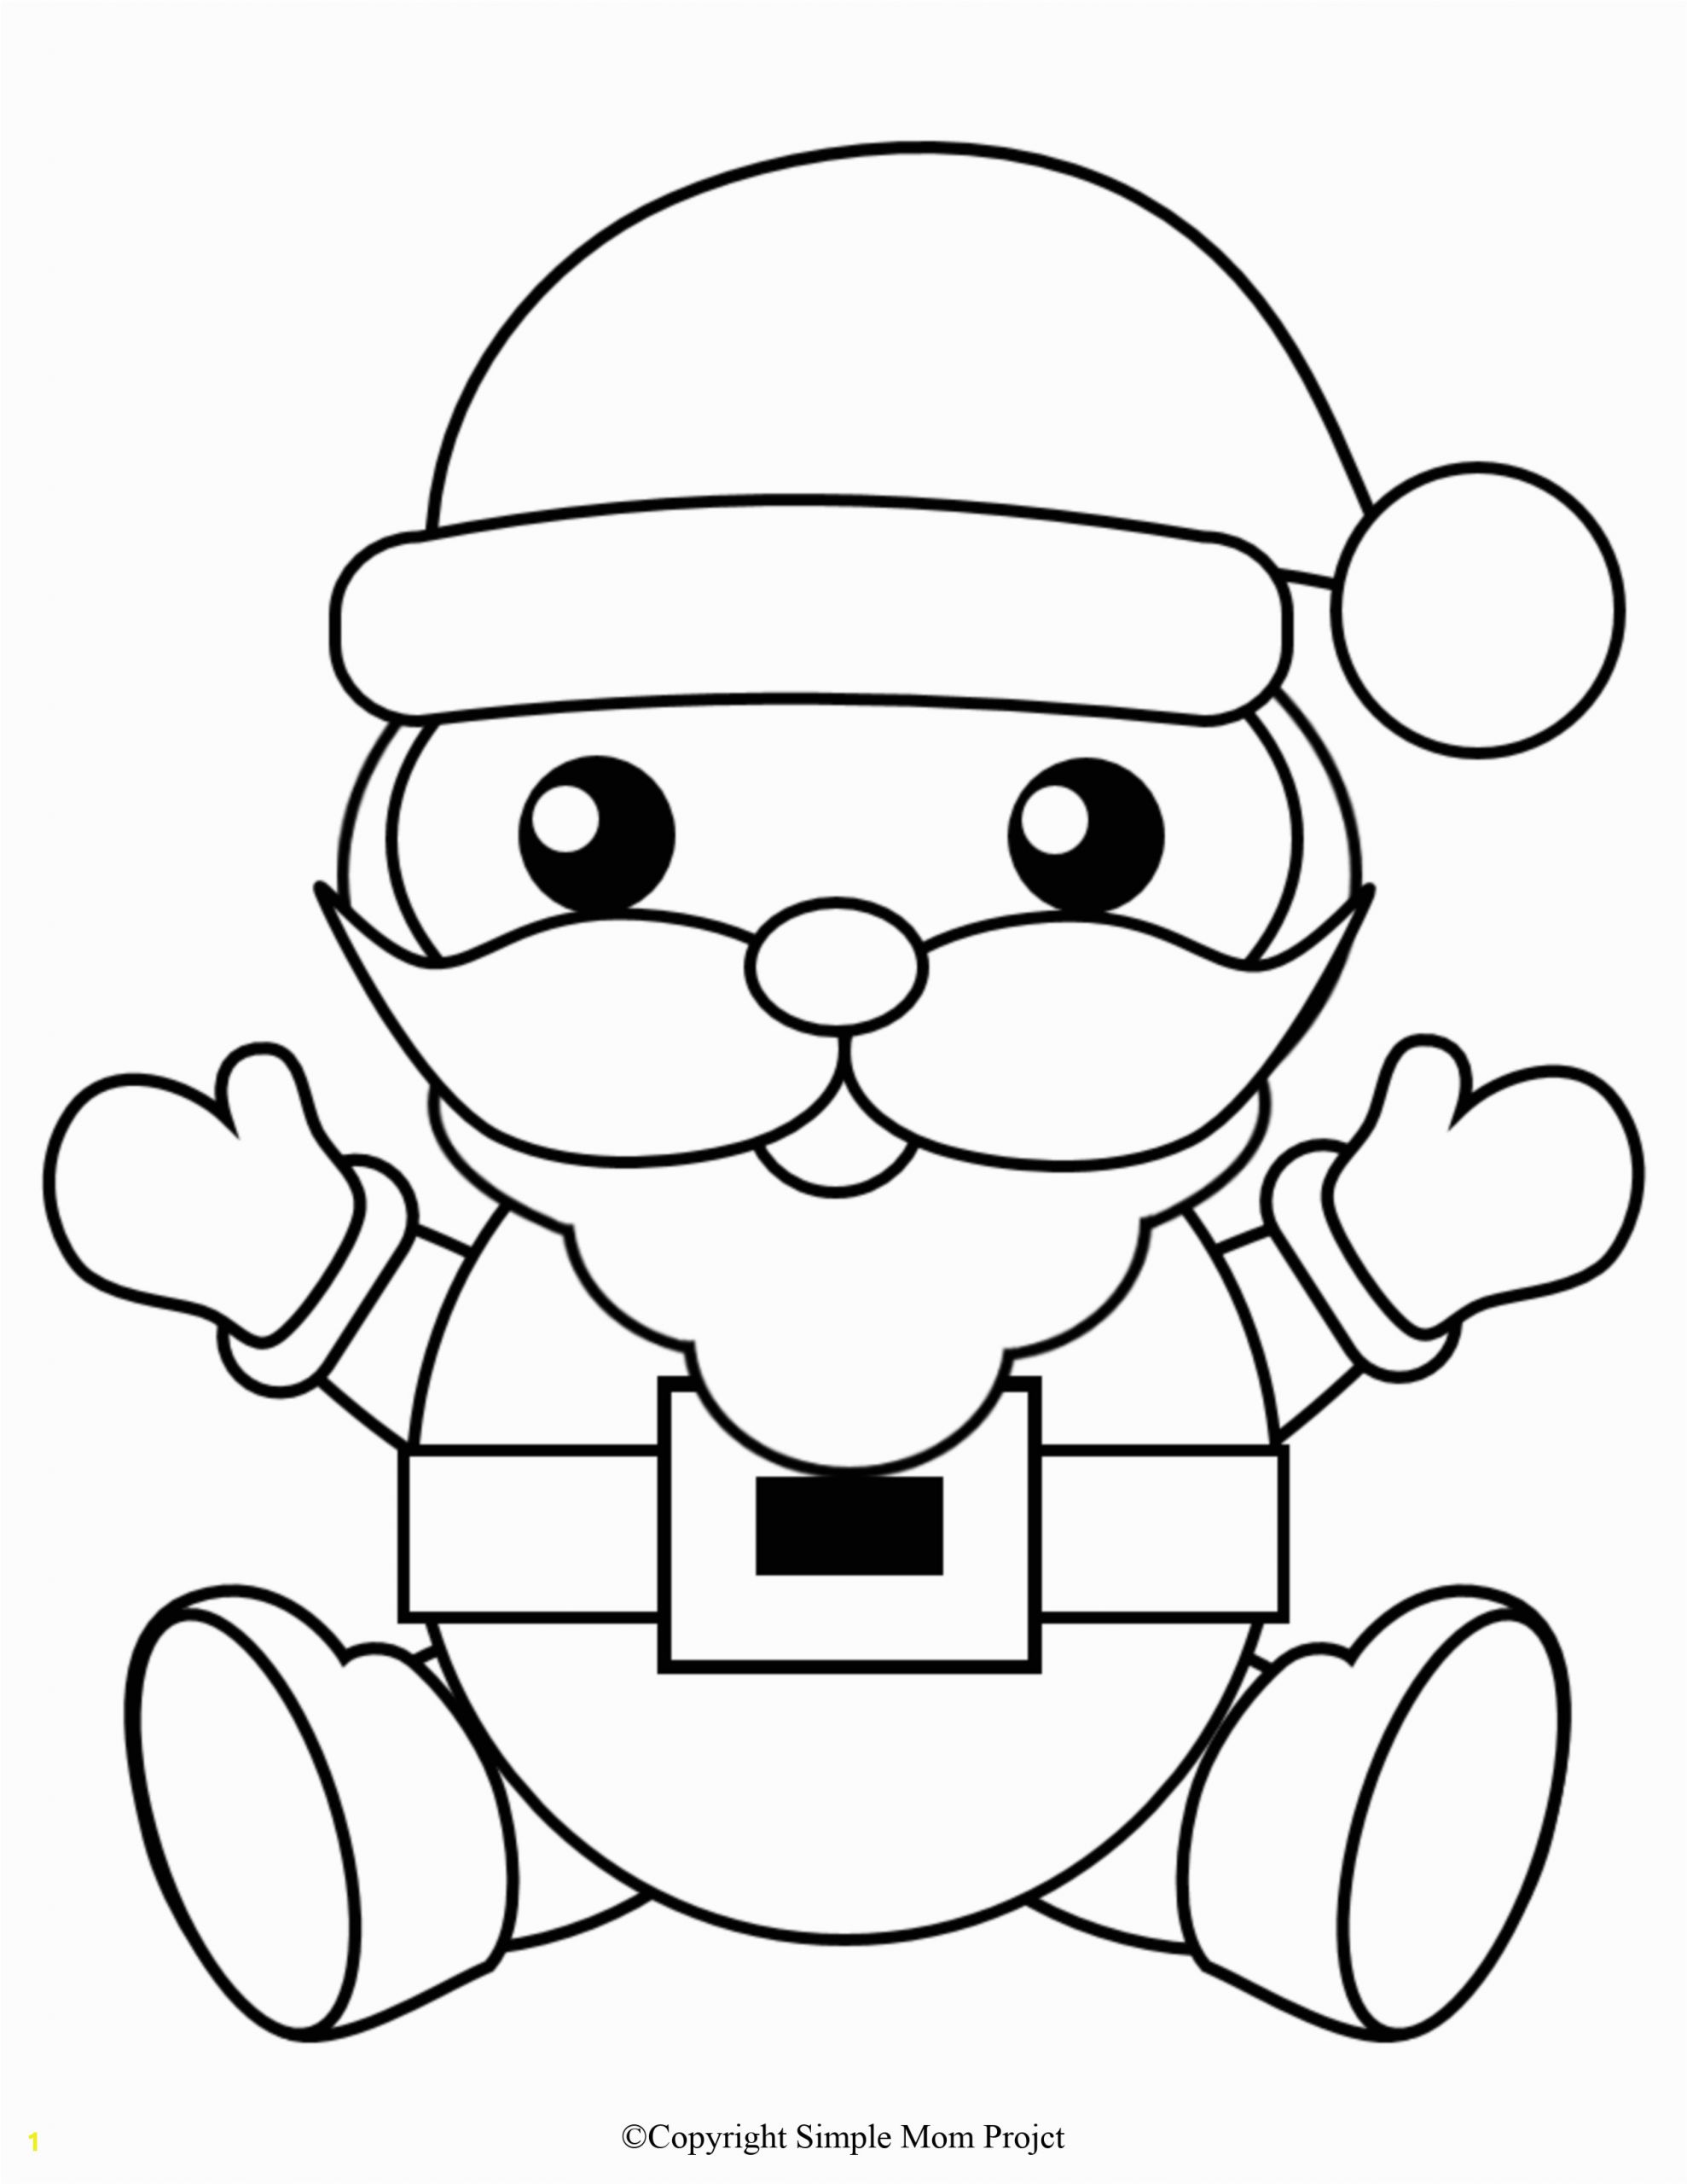 Coloring Pages for Big Kids Free Printable Christmas Coloring Sheets for Kids and Adults